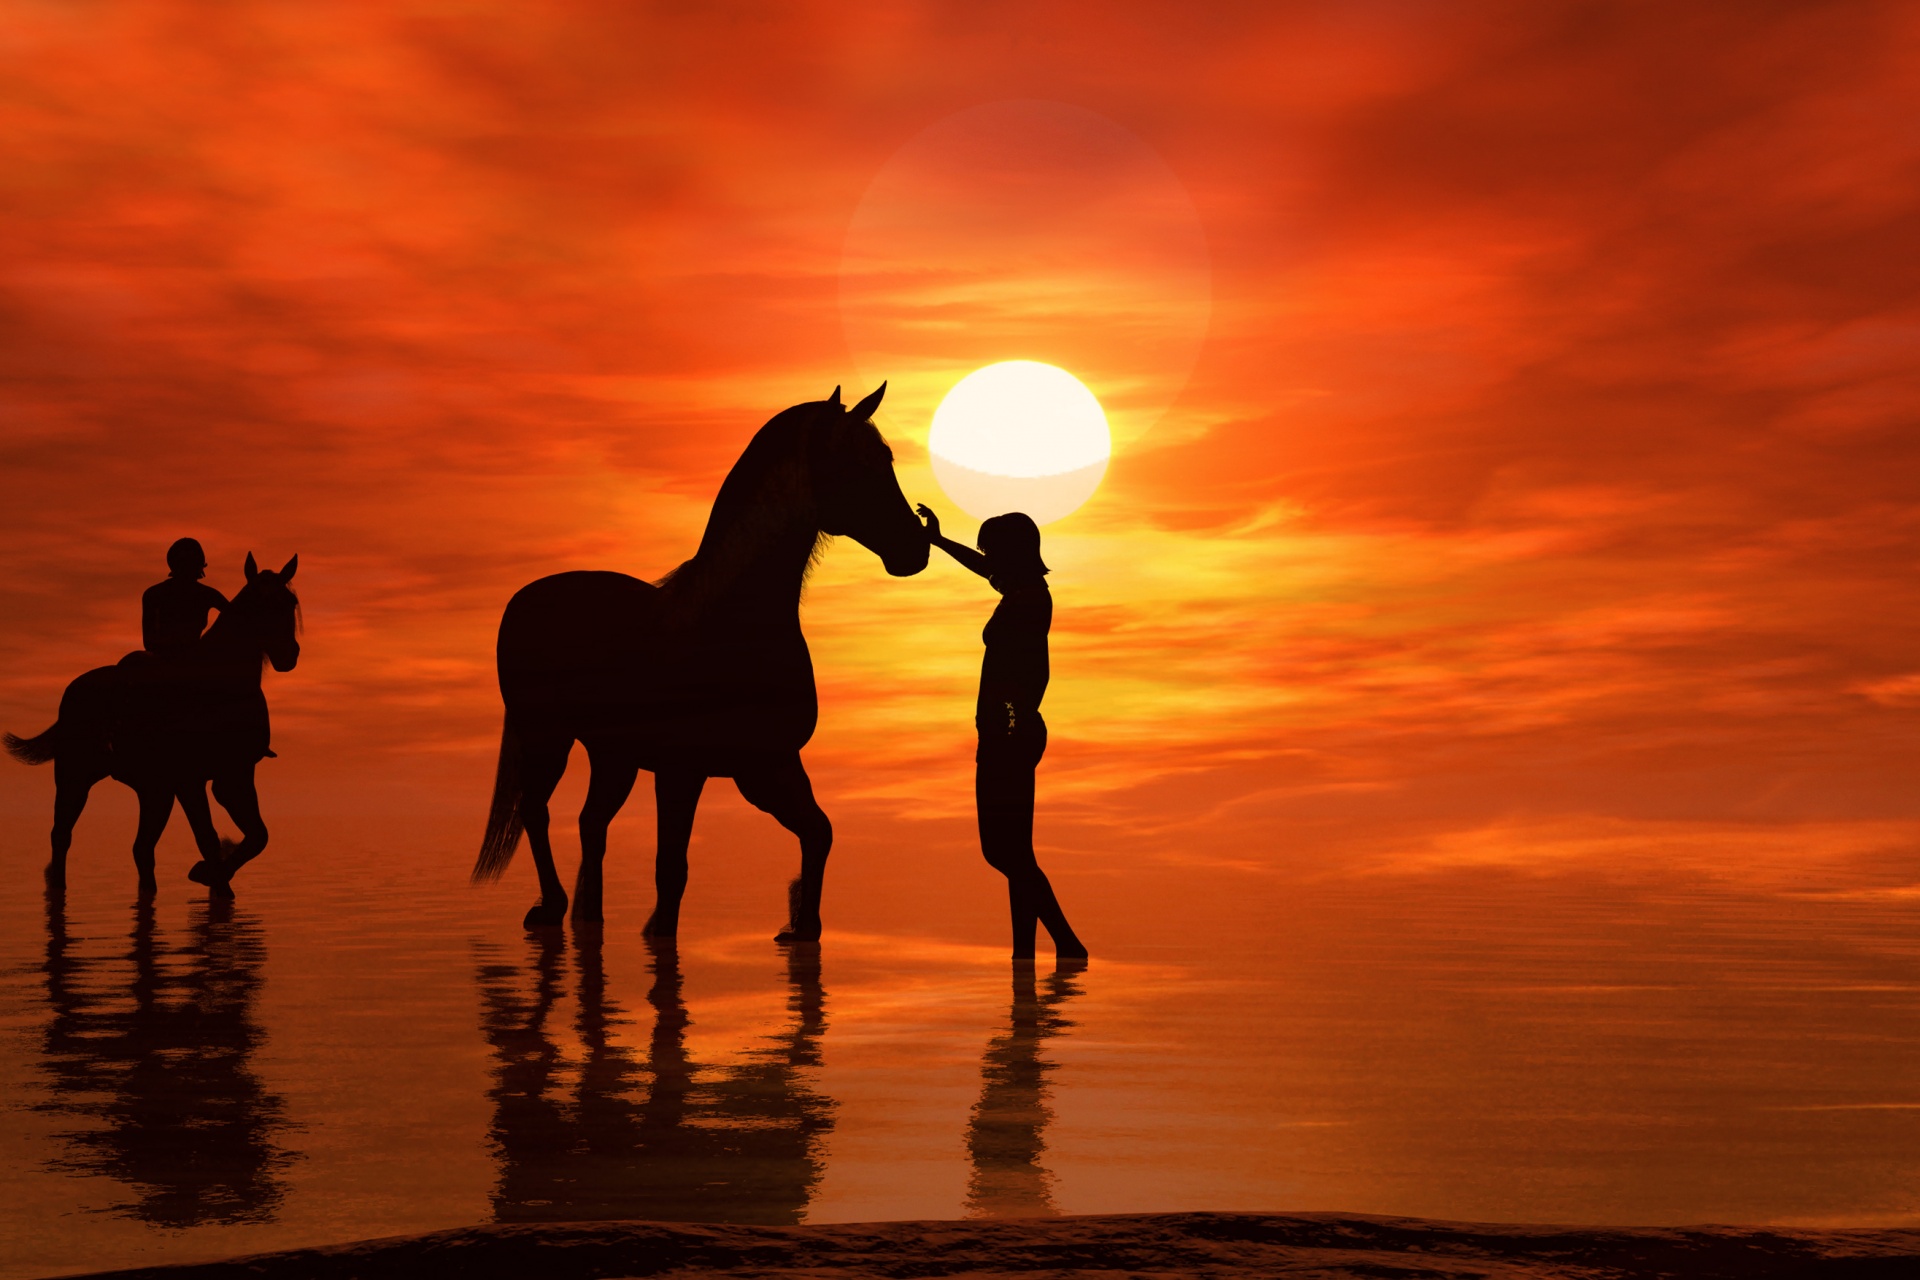 Horses silhouette at sunset illustration with water reflection